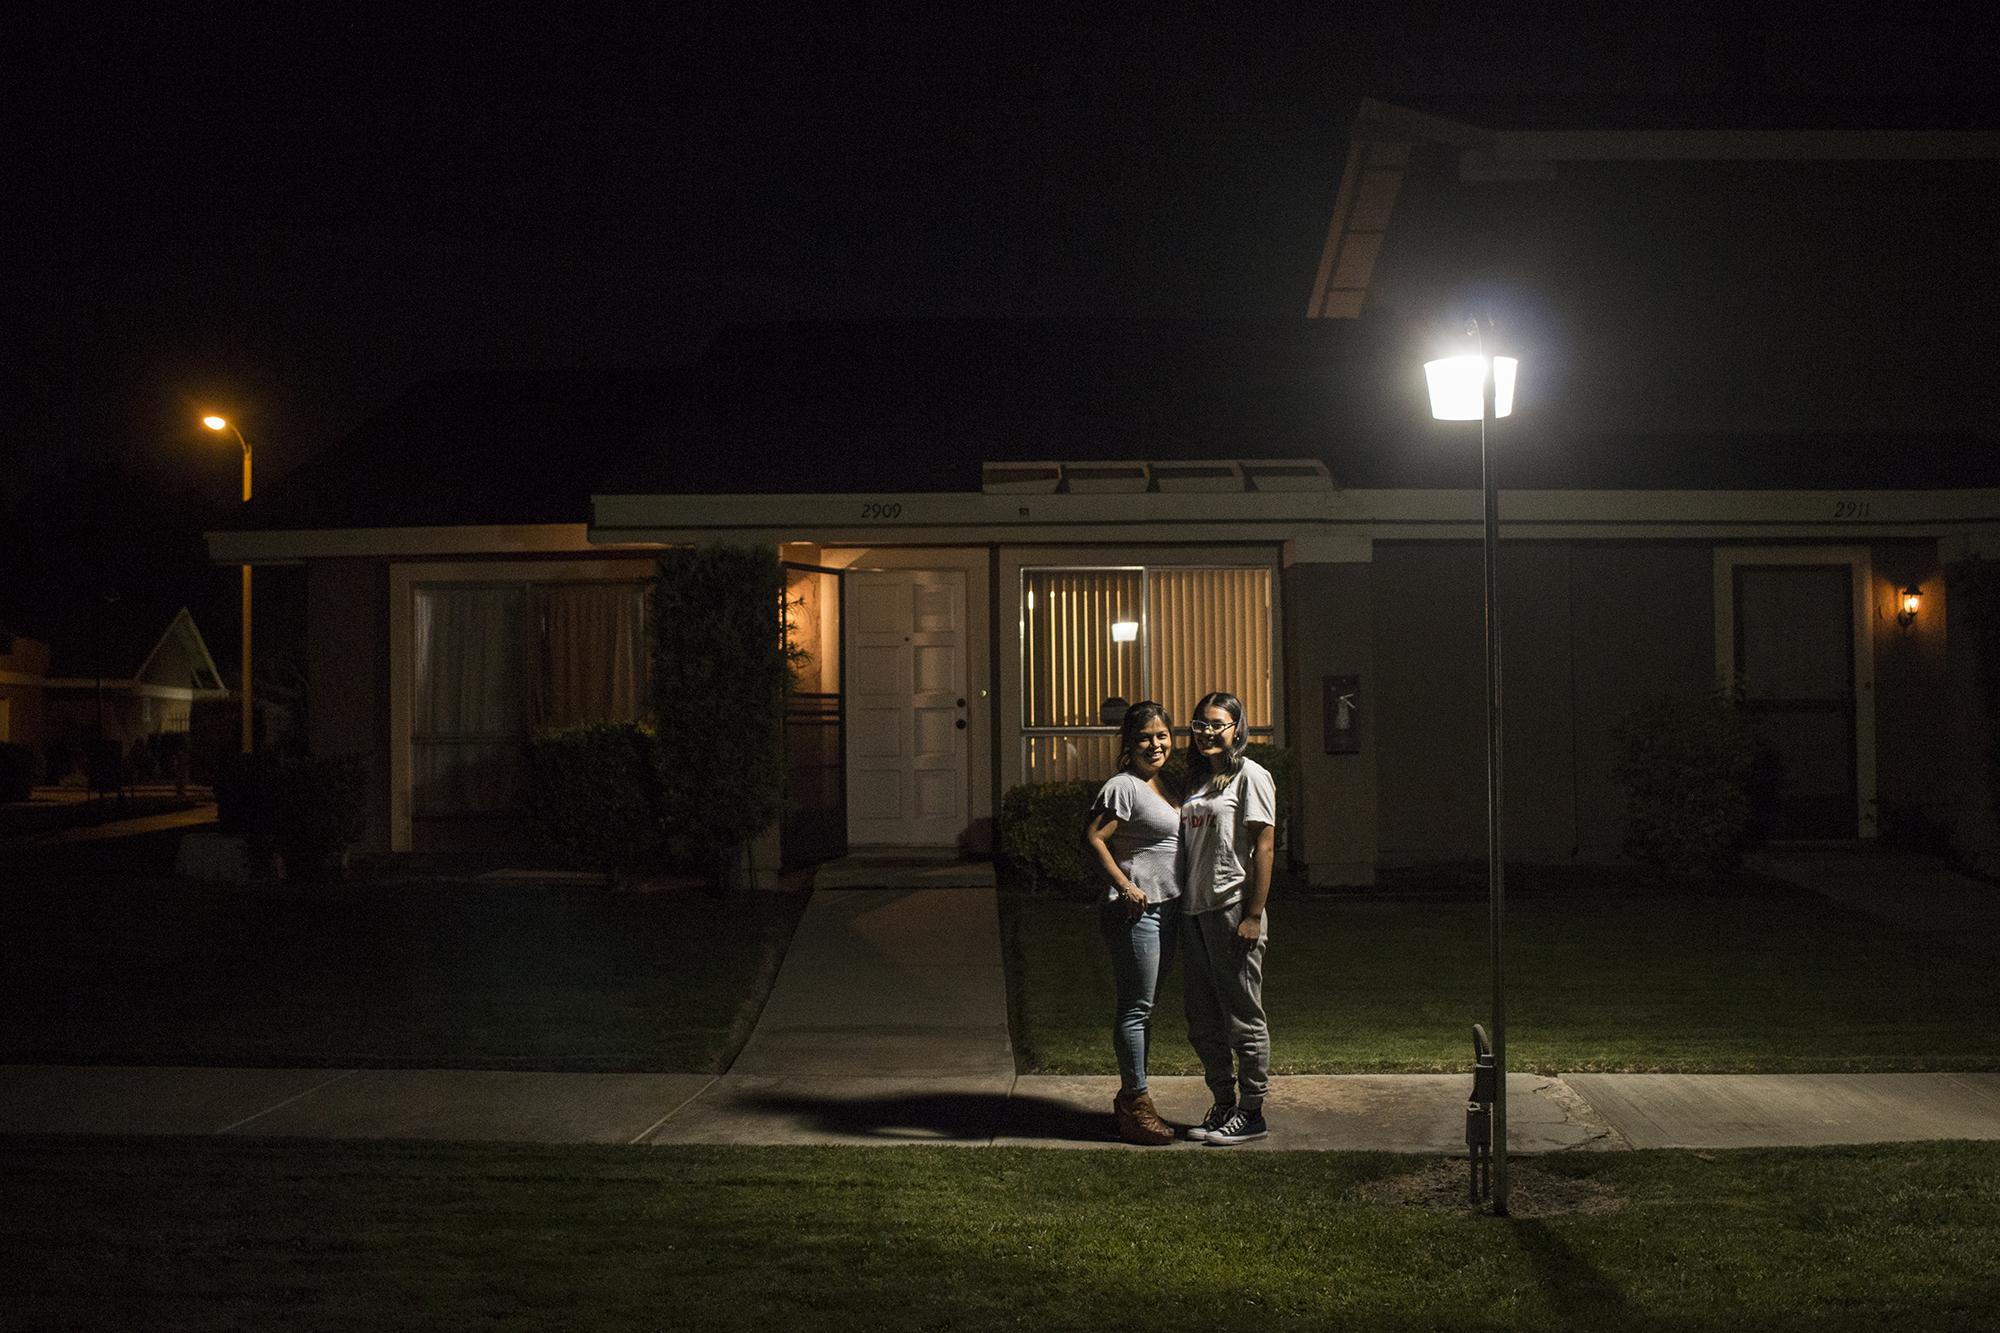 Desireé Ramírez, 47, with her daughter Gisselle Calvillo, 17, at their home in Lancaster, California. Desirée migrated in the 80s at just 6 years old. She crossed the border undocumented with her mother and grew up in Los Angeles. Now she manages a school. Her son Erick, born in the United States, plays for La Selecta. “I